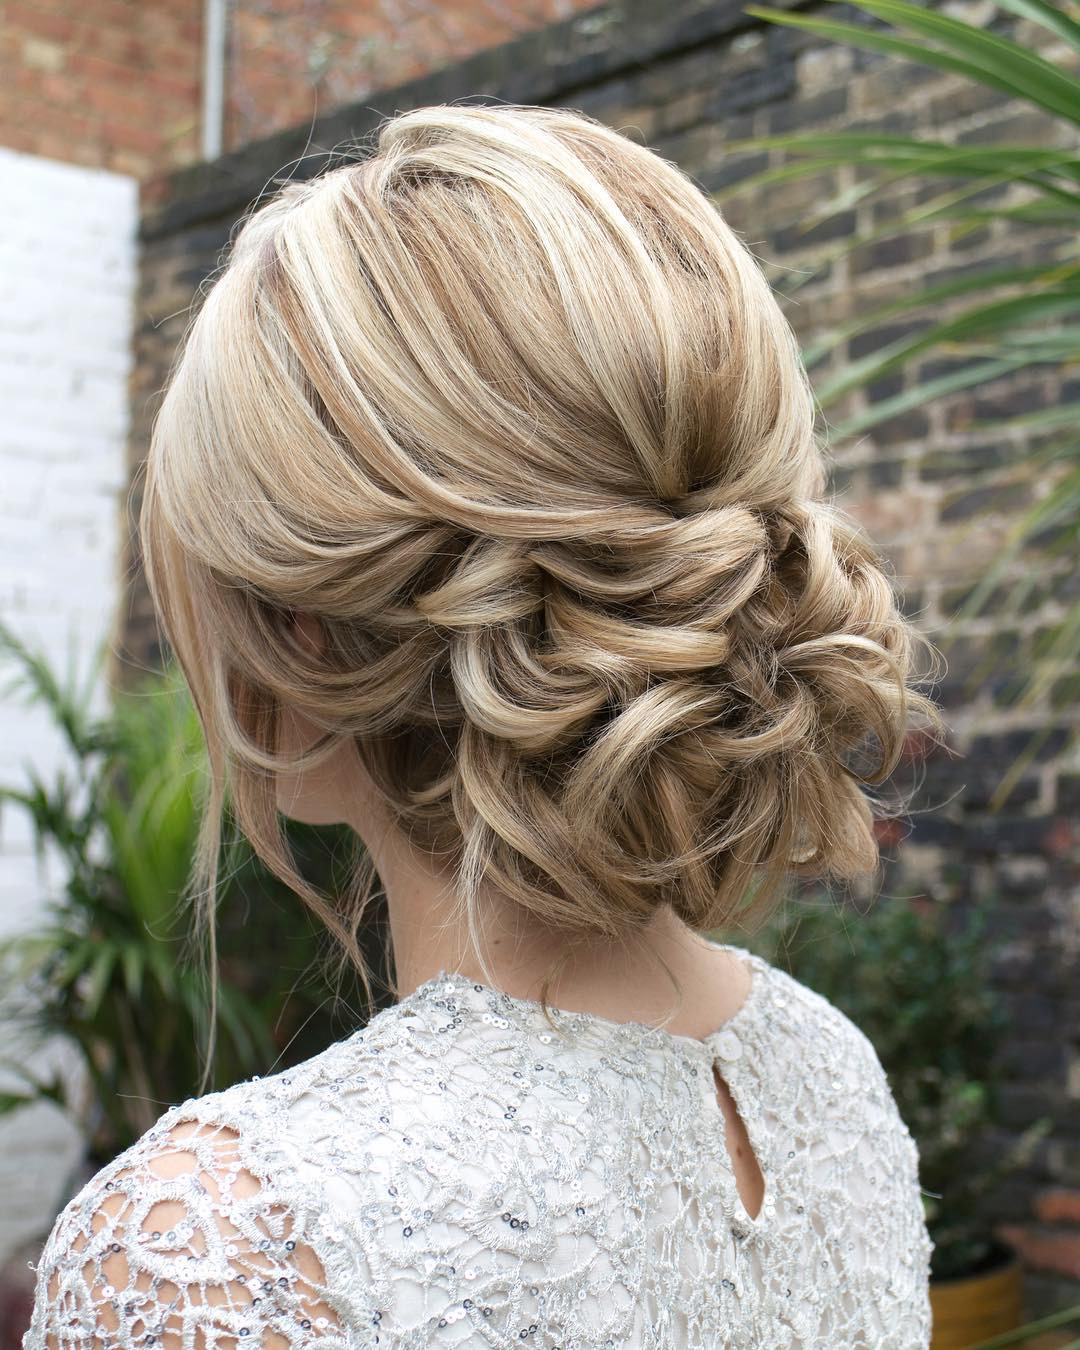 Hairstyle Updos Prom
 10 Gorgeous Prom Updos for Long Hair Prom Updo Hairstyles